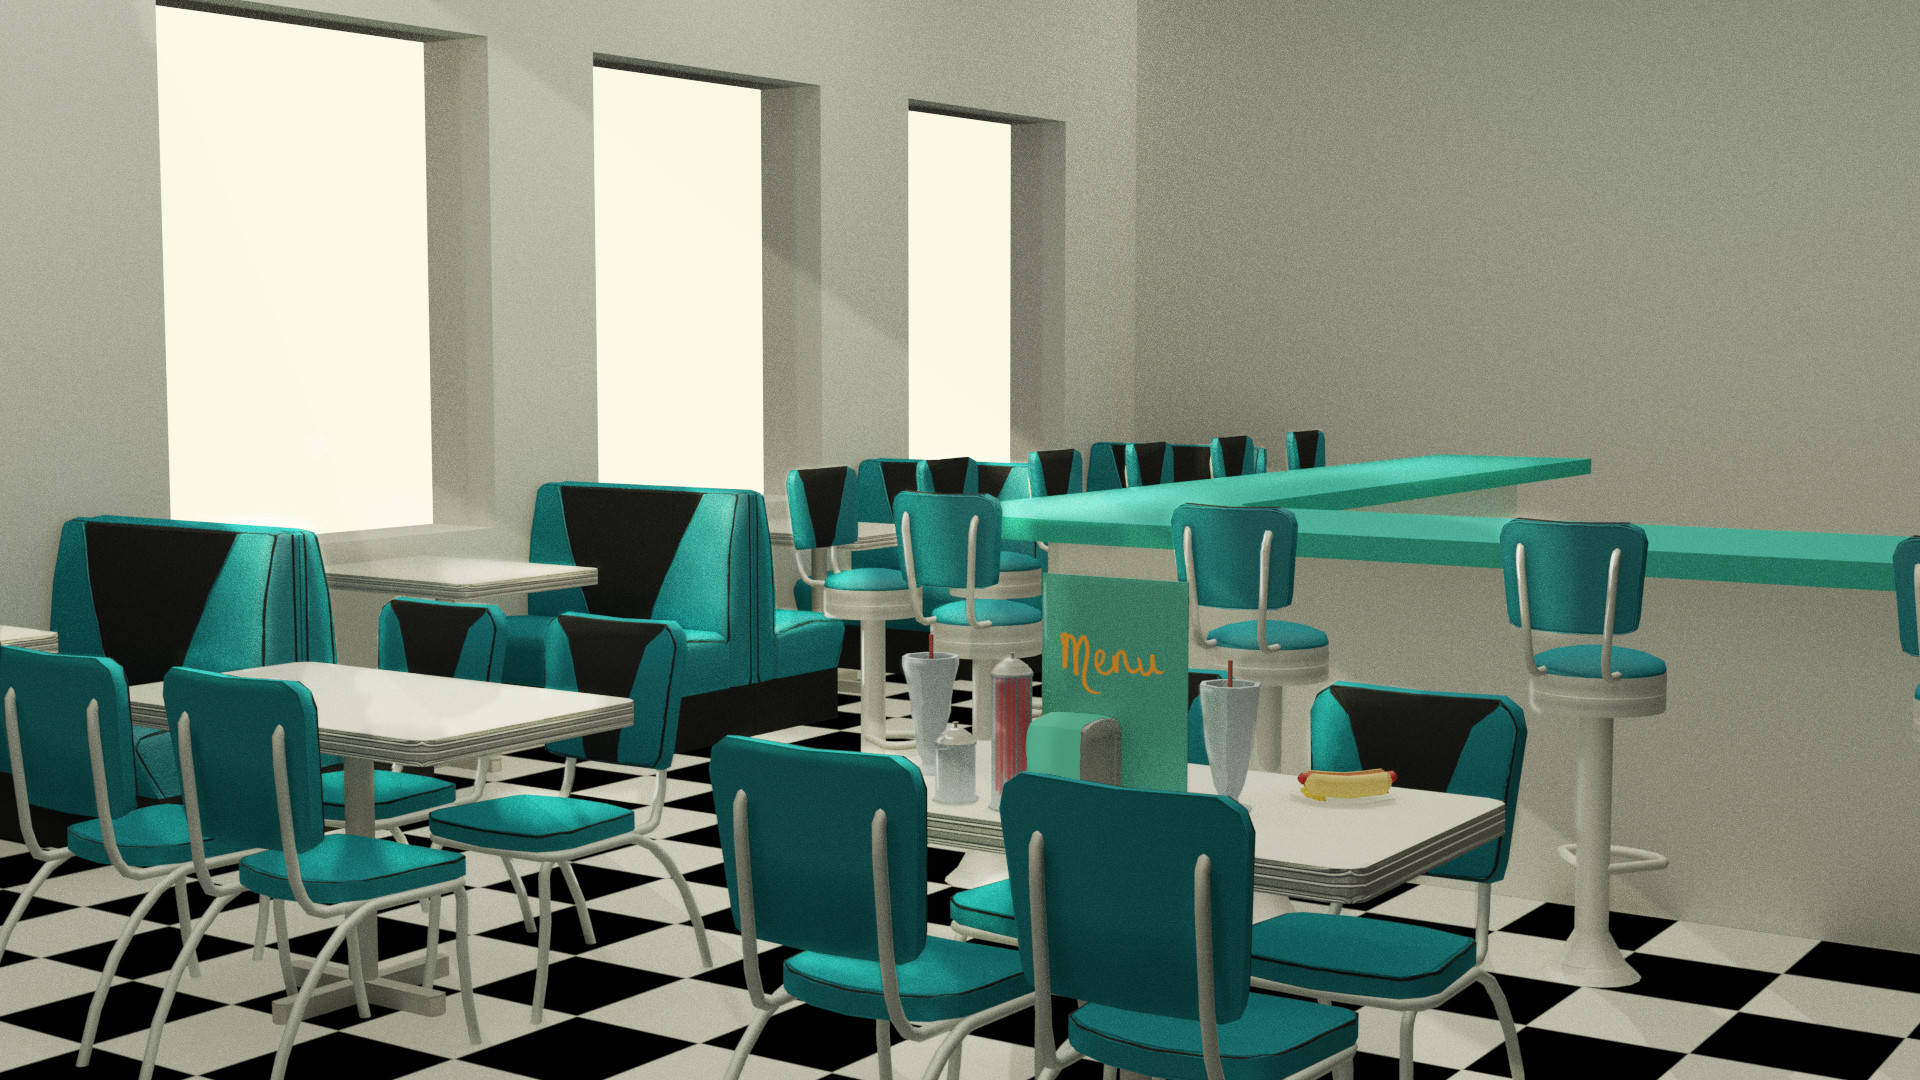 Caption: Authentic 50s Diner With White And Green Interior Background